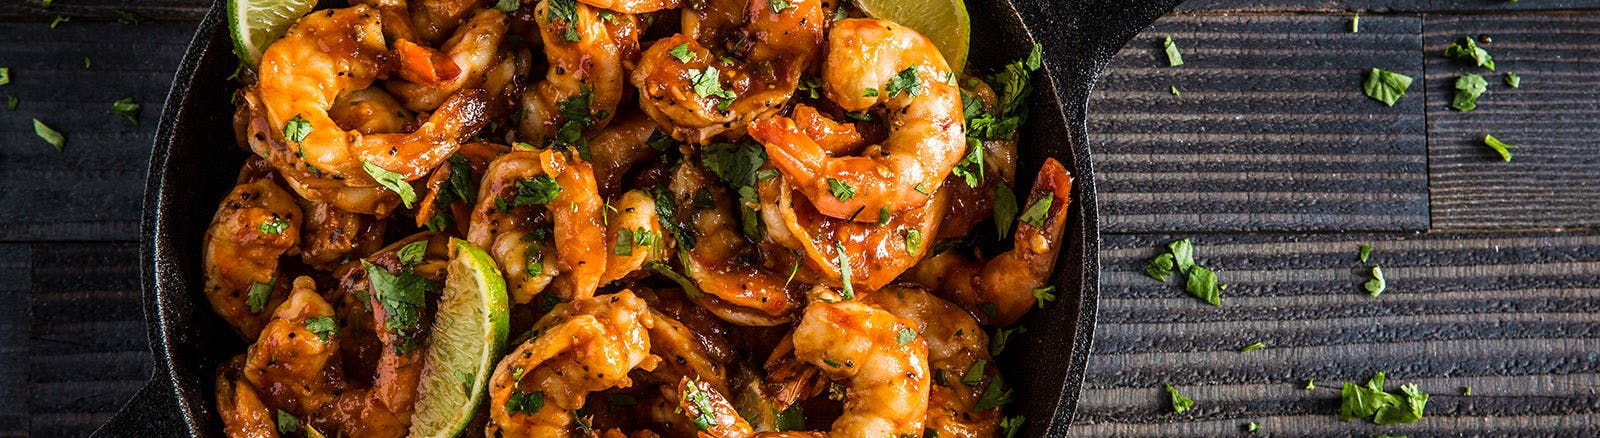 Grilled Texas Spicy Shrimp